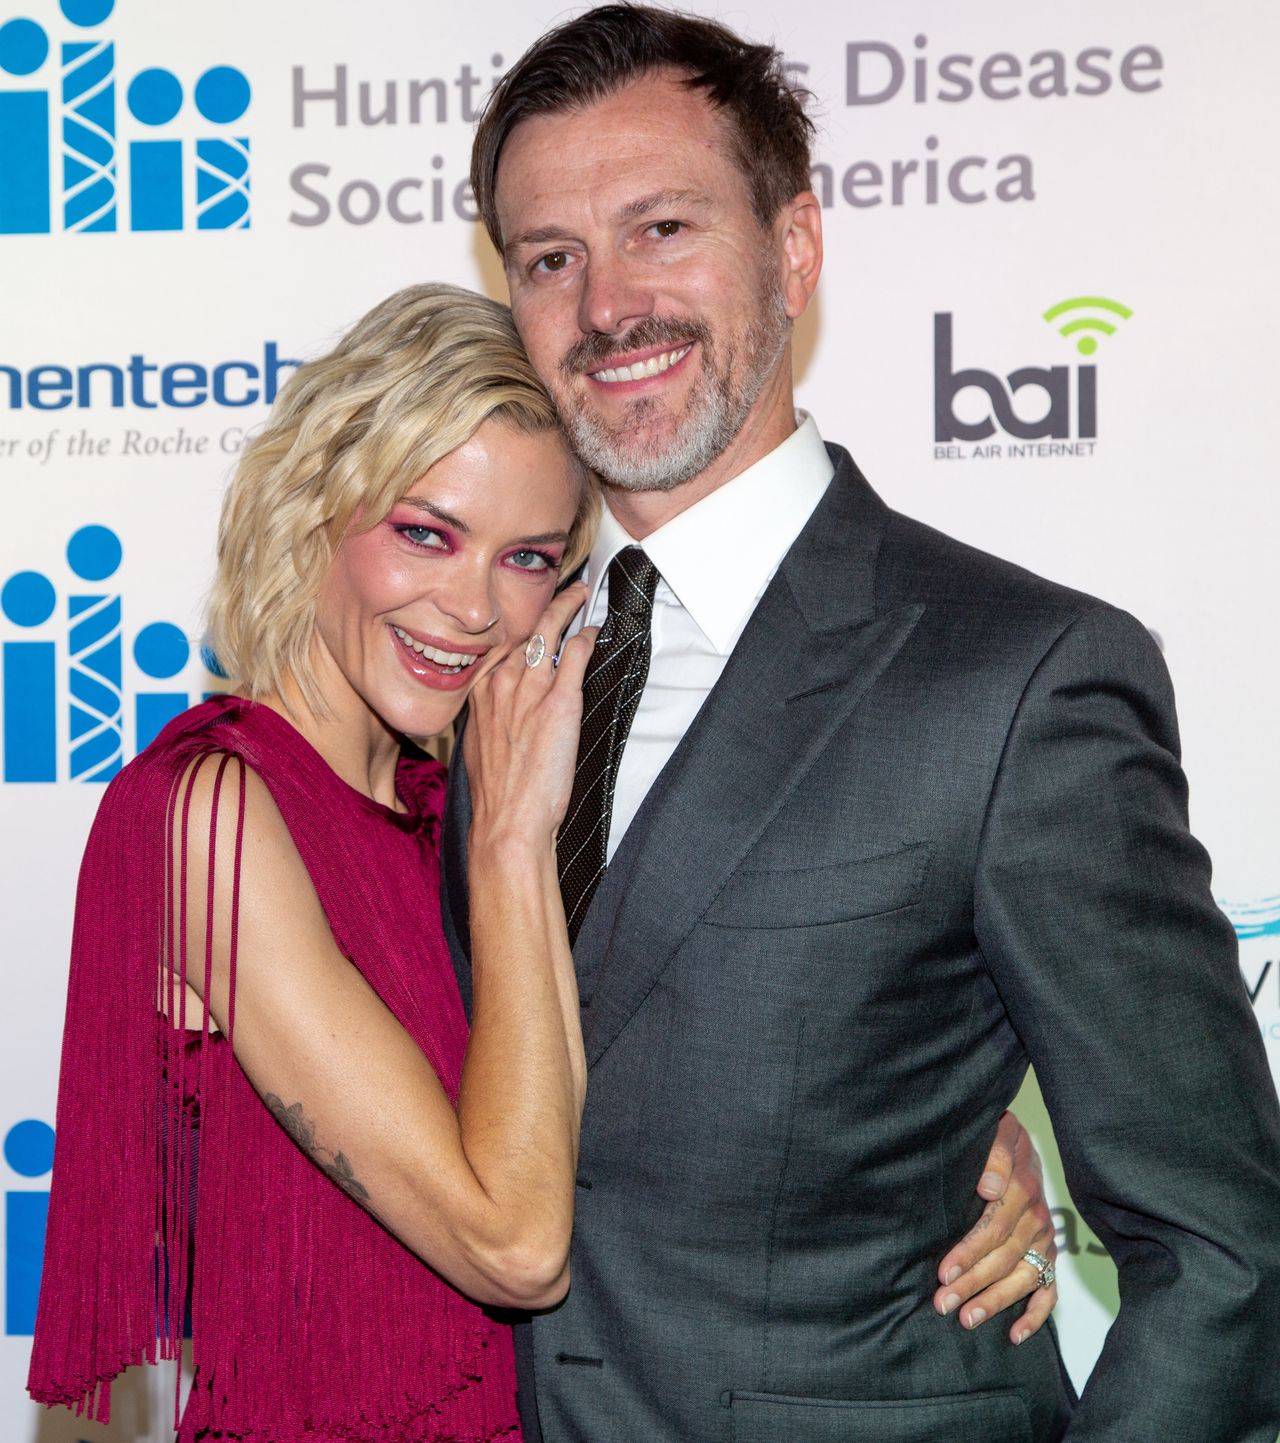 Jaime King and Kyle Newman in 2019.